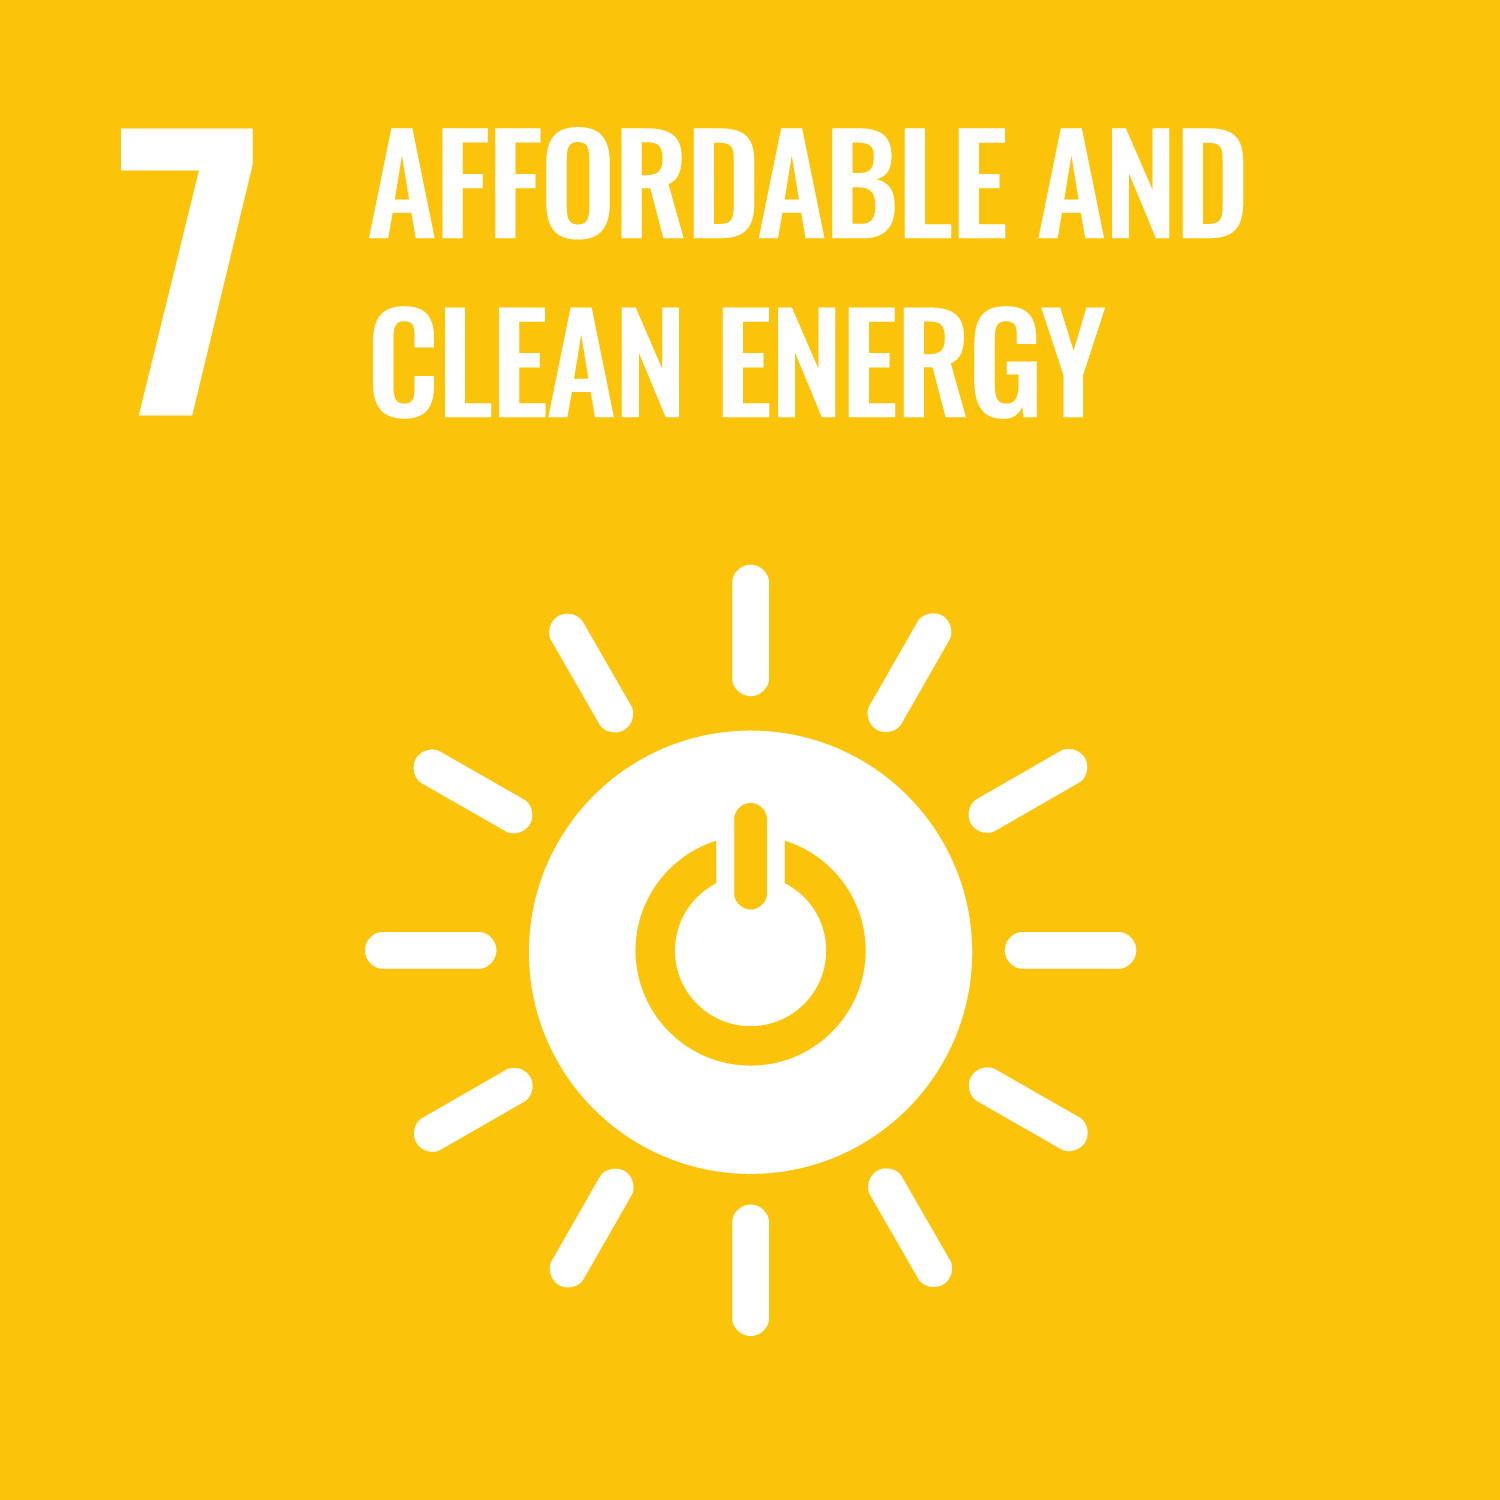 Sustainable Development Goal 7 Affordable and Clean Energy